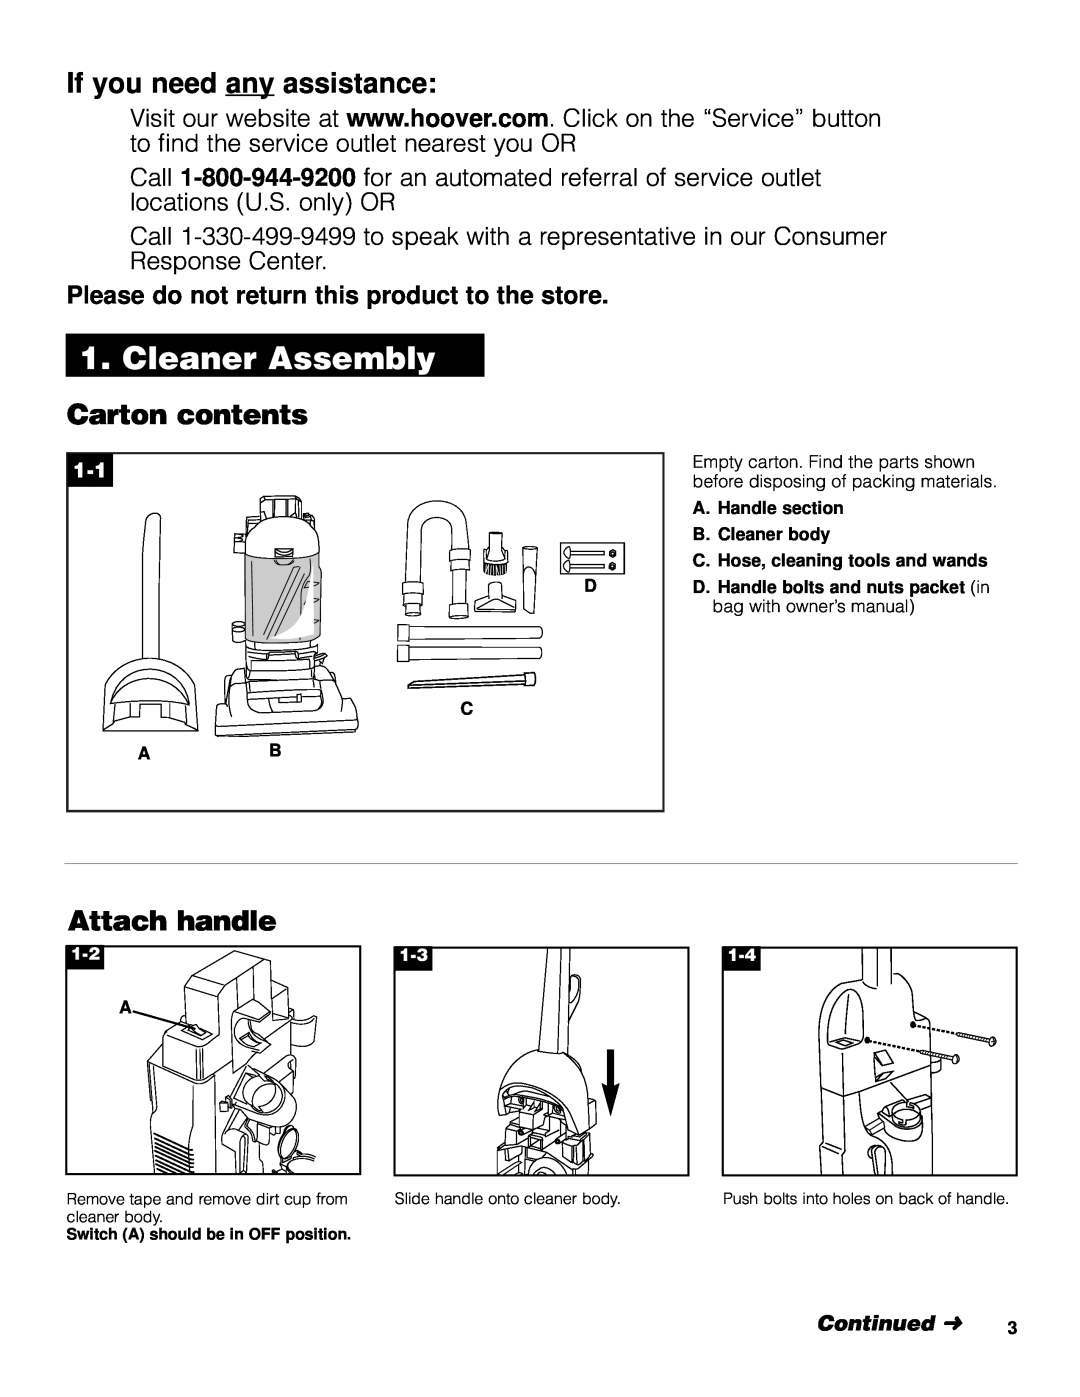 Hoover U5361950 owner manual Cleaner Assembly, If you need any assistance, Carton contents, Attach handle 